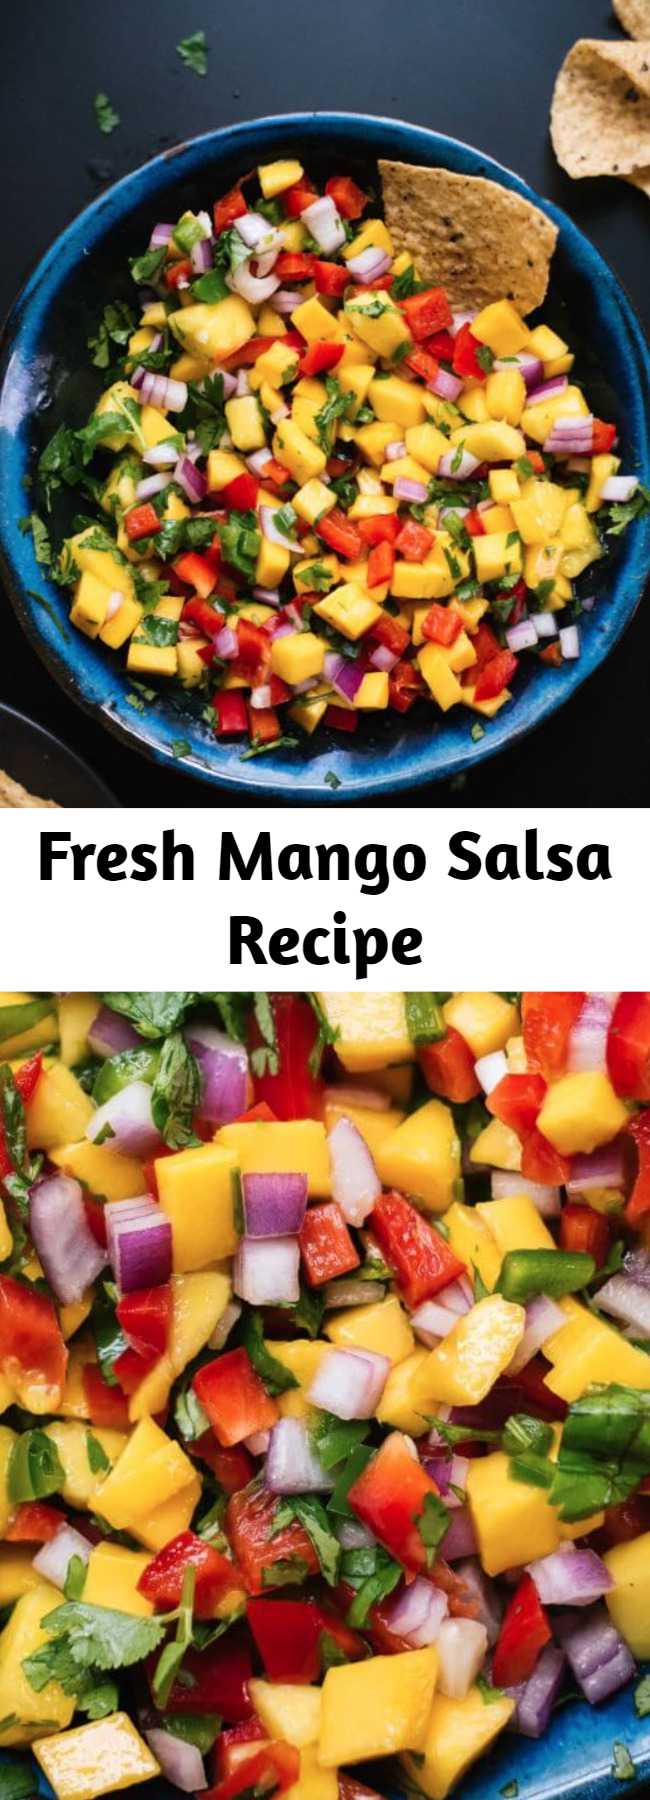 Fresh Mango Salsa Recipe - This simple and colorful mango salsa is super easy to make! It’s sweet, spicy and absolutely delicious. Serve this fresh mango salsa with chips, on tacos or salads, or as a salad itself. It’s that good. Recipe yields about 3 cups salsa.